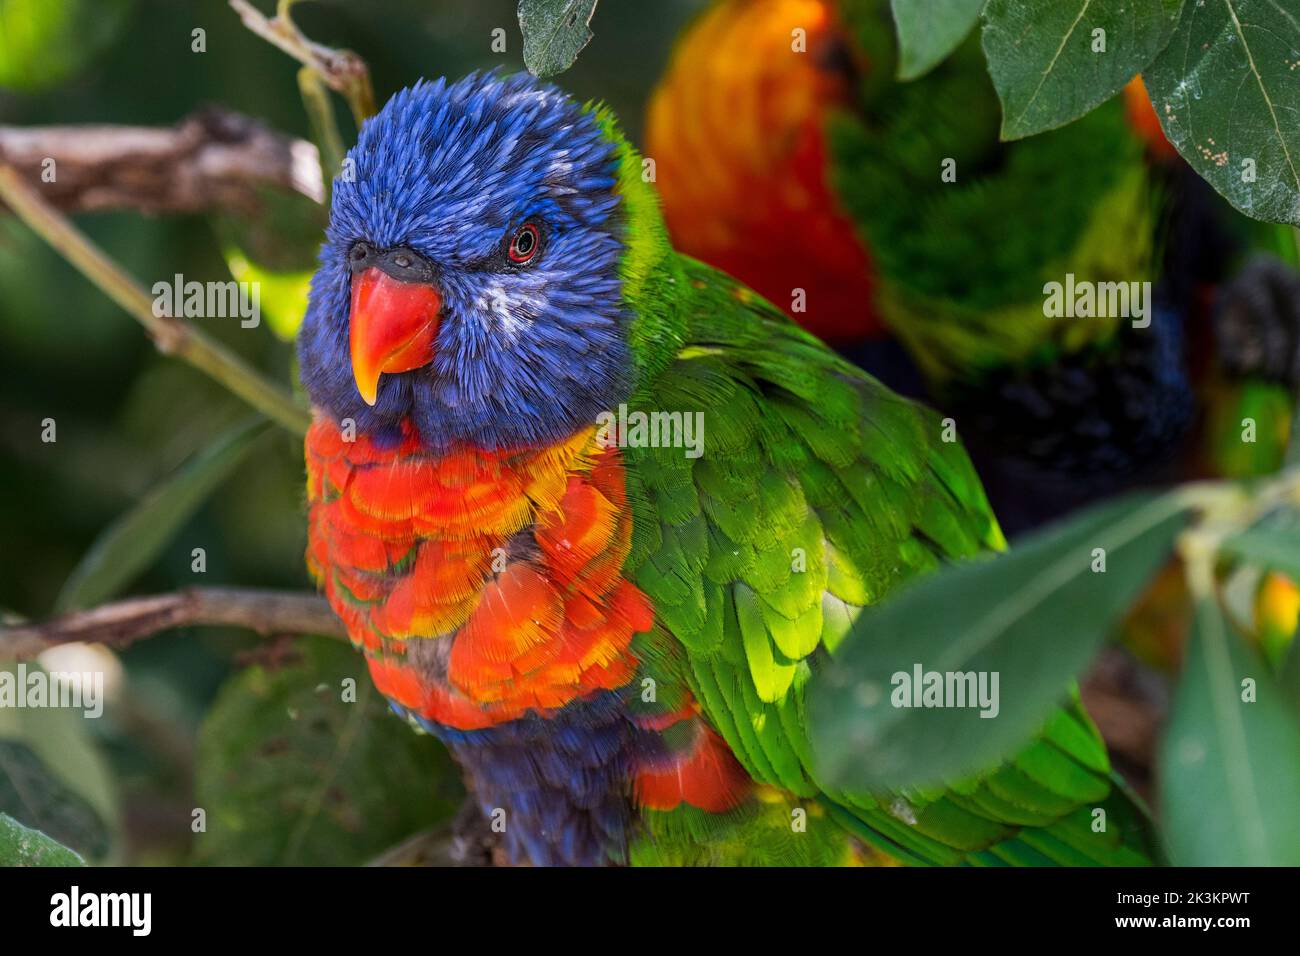 Rainbow lorikeet (Trichoglossus moluccanus) perched in tree, species of parrot native to Australia Stock Photo